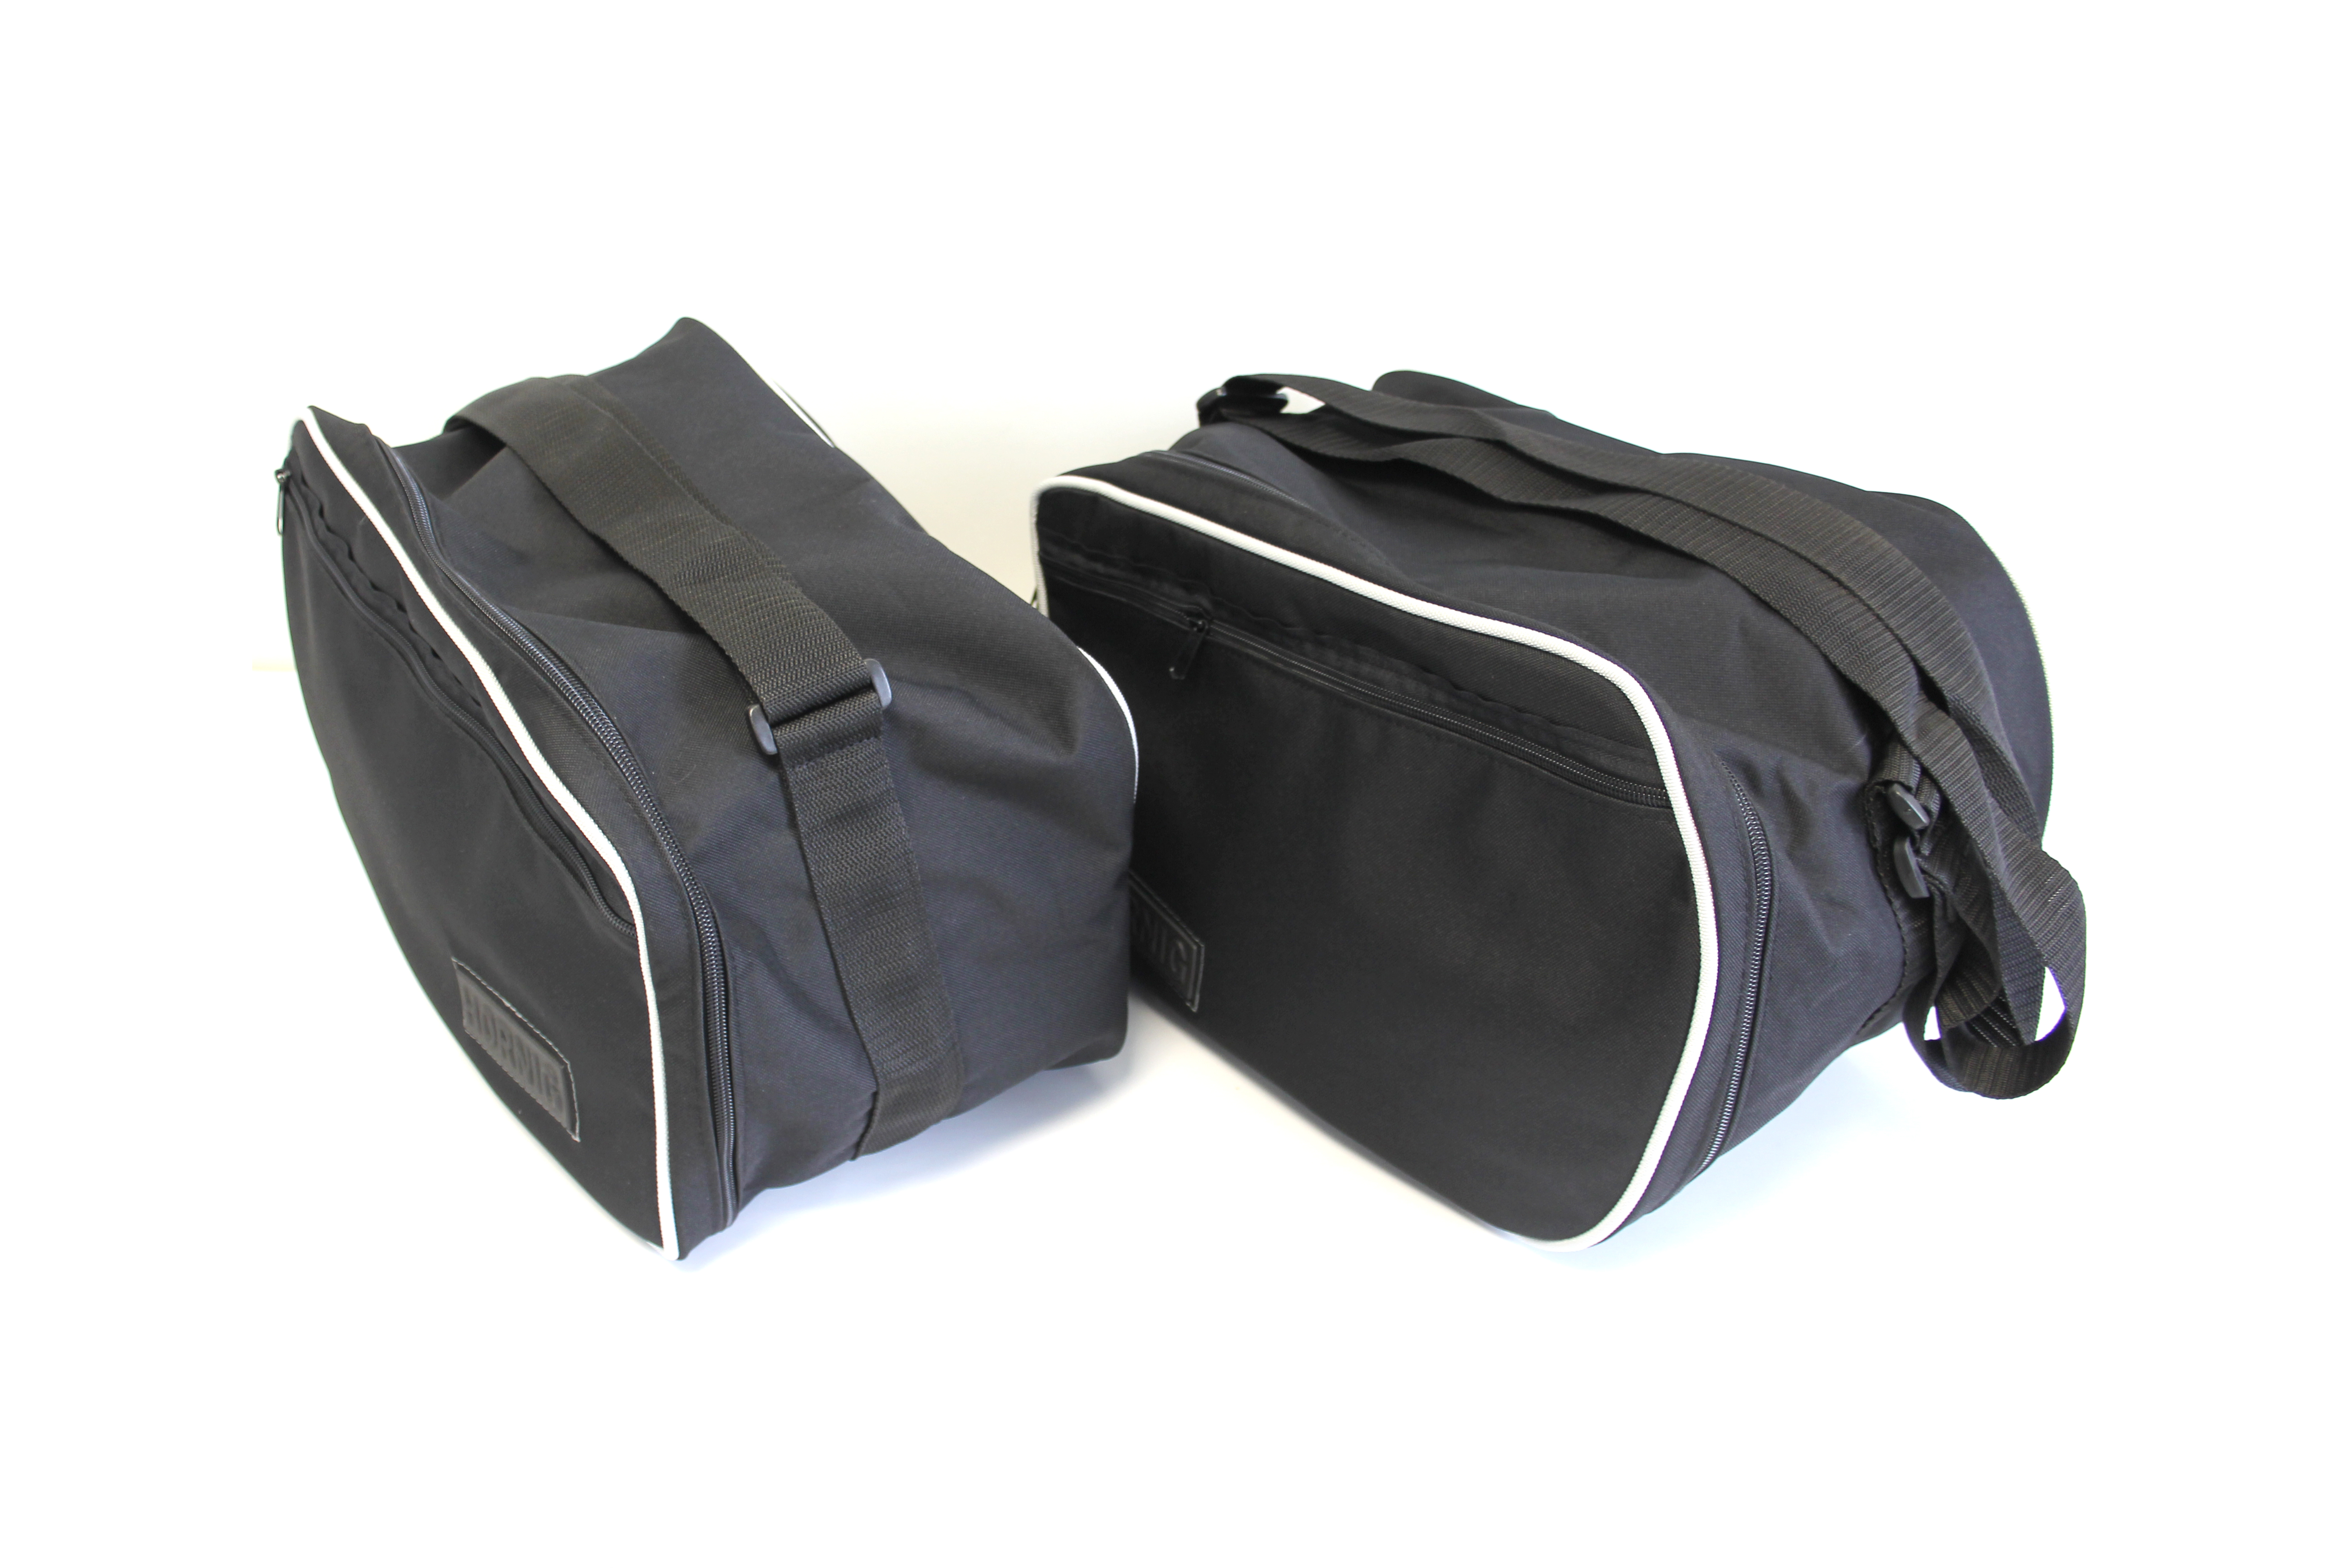 Inside Bag for R1200R LC, R1200RS, S1000XR & F800GT | Motorcycle ...